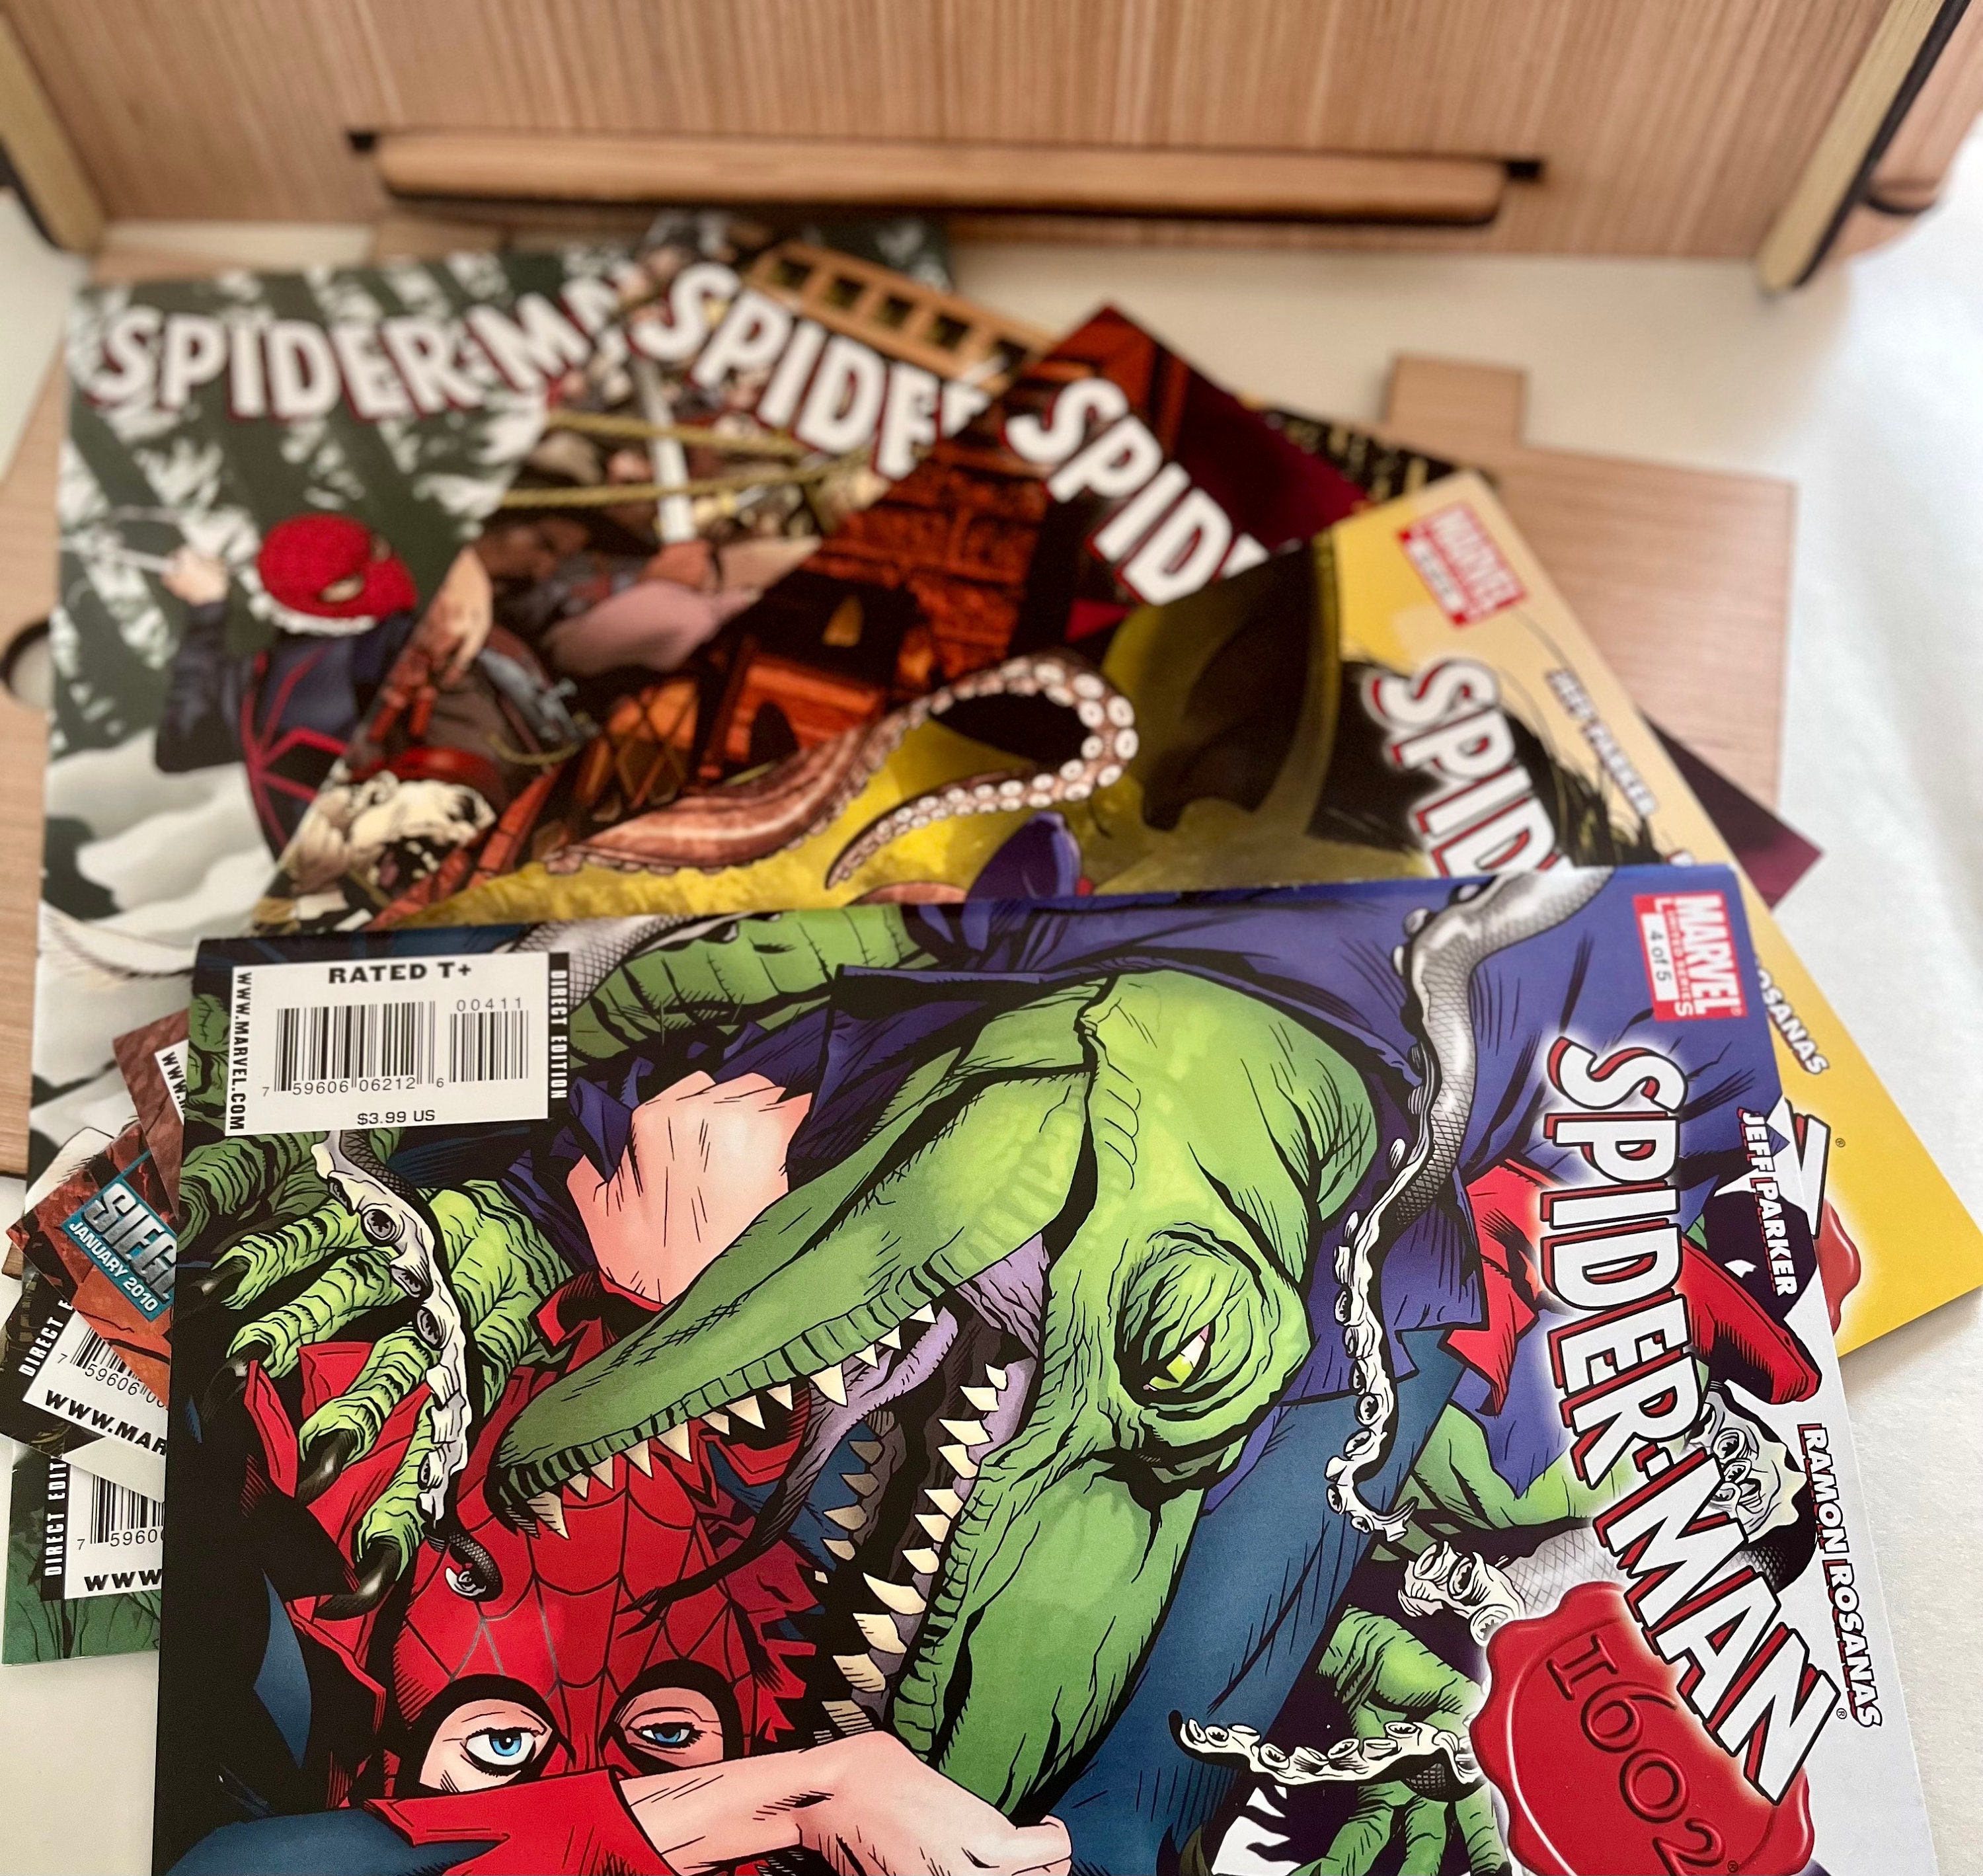 Great Gift for Your Spider-man Fan Complete Set of Spiderman 1602